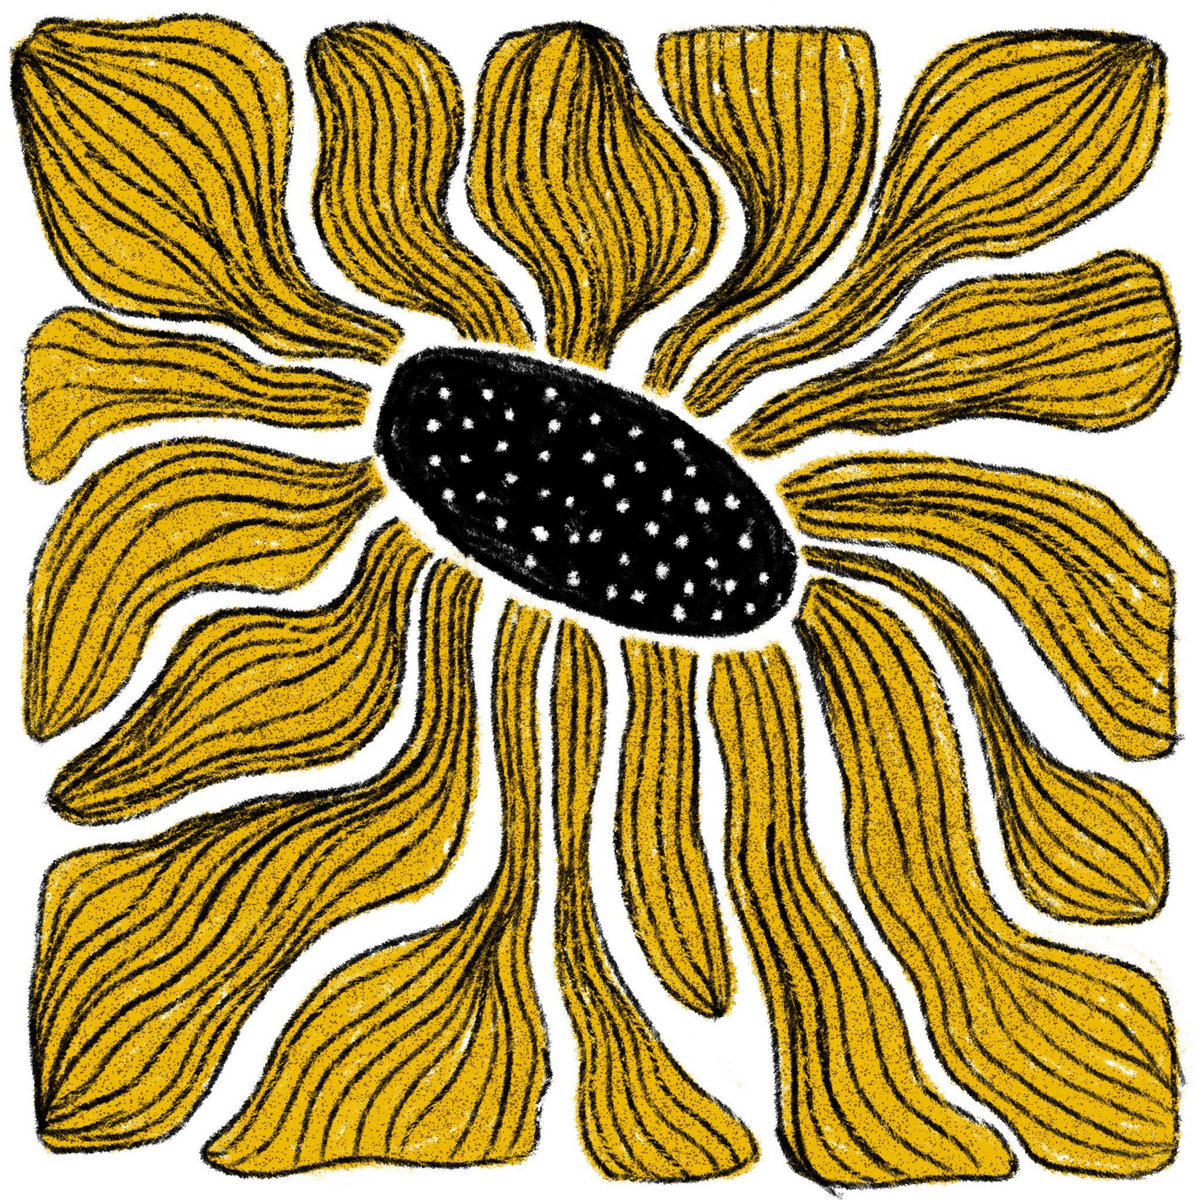 library card sunflowers single artwork - illustration of a sunflowers blossom